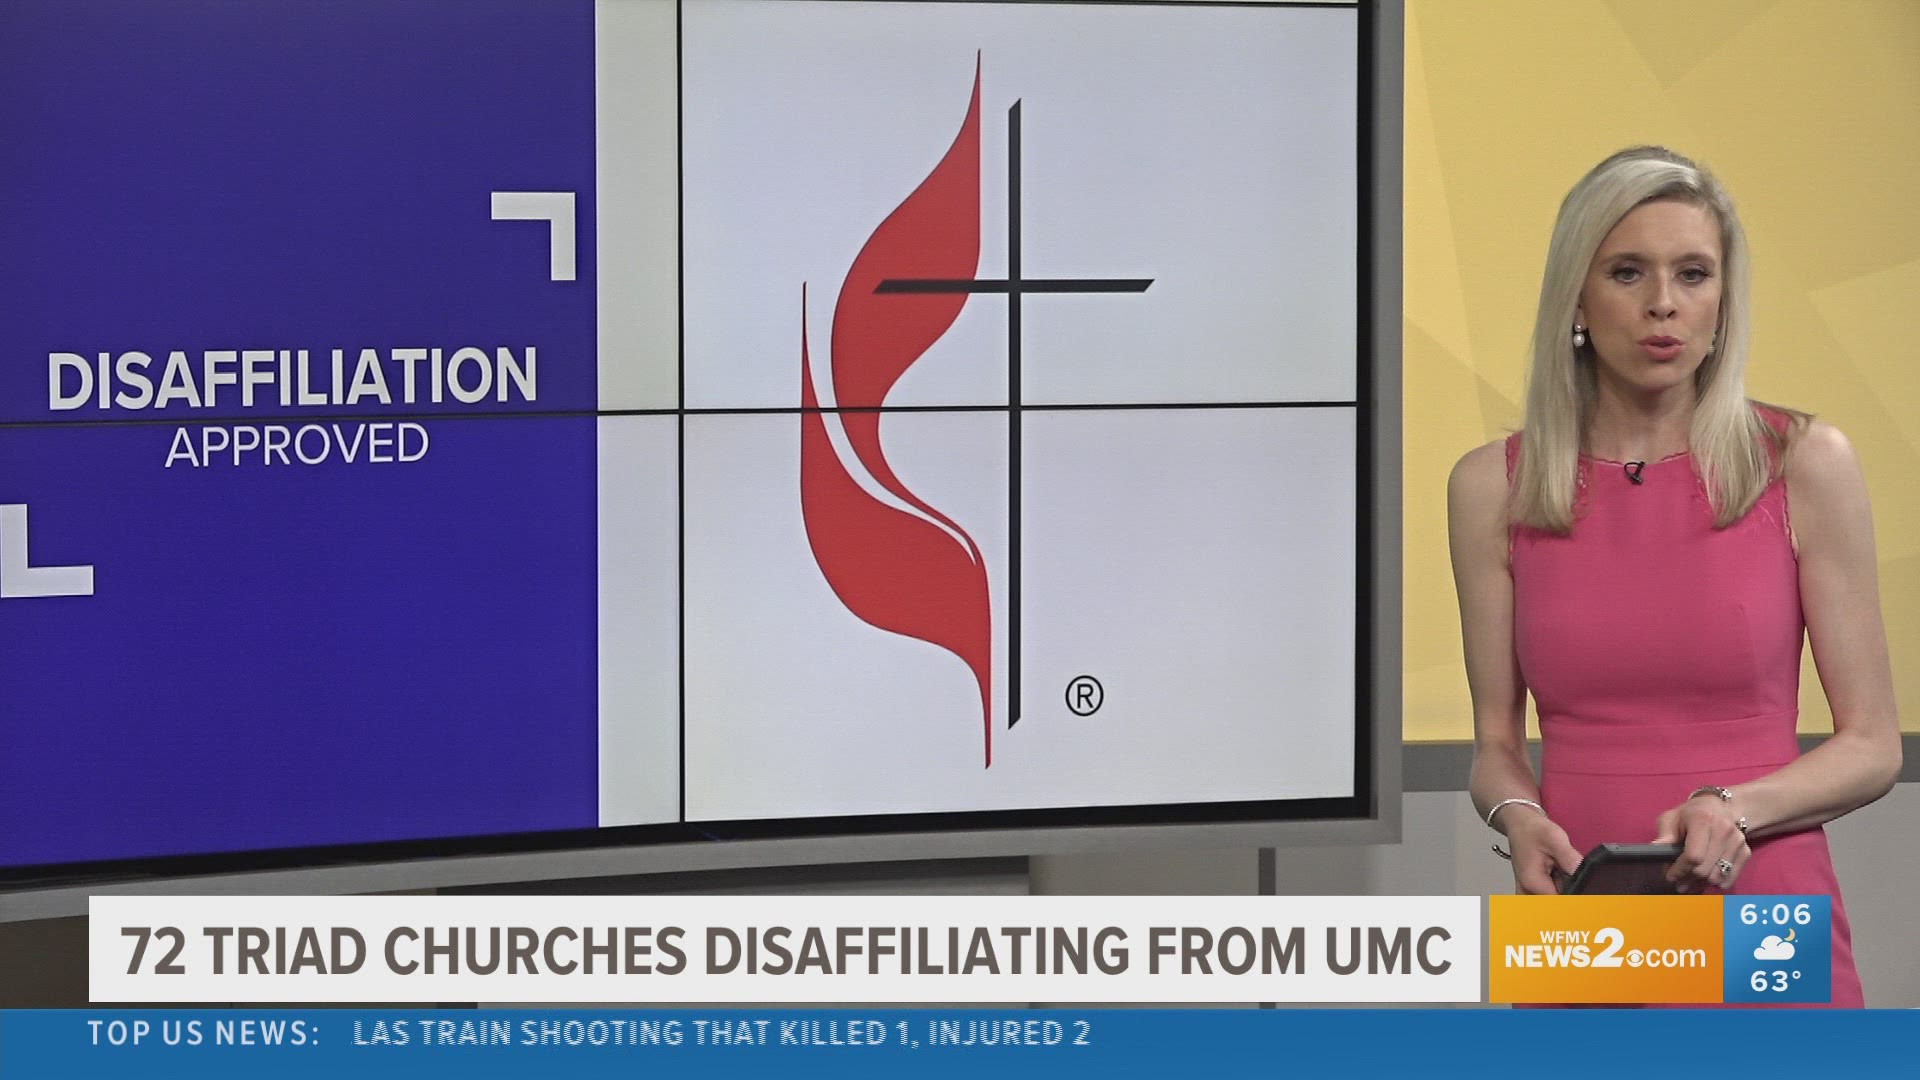 In total, 192 churches will disaffiliate, including 72 from across the Triad and surrounding areas.